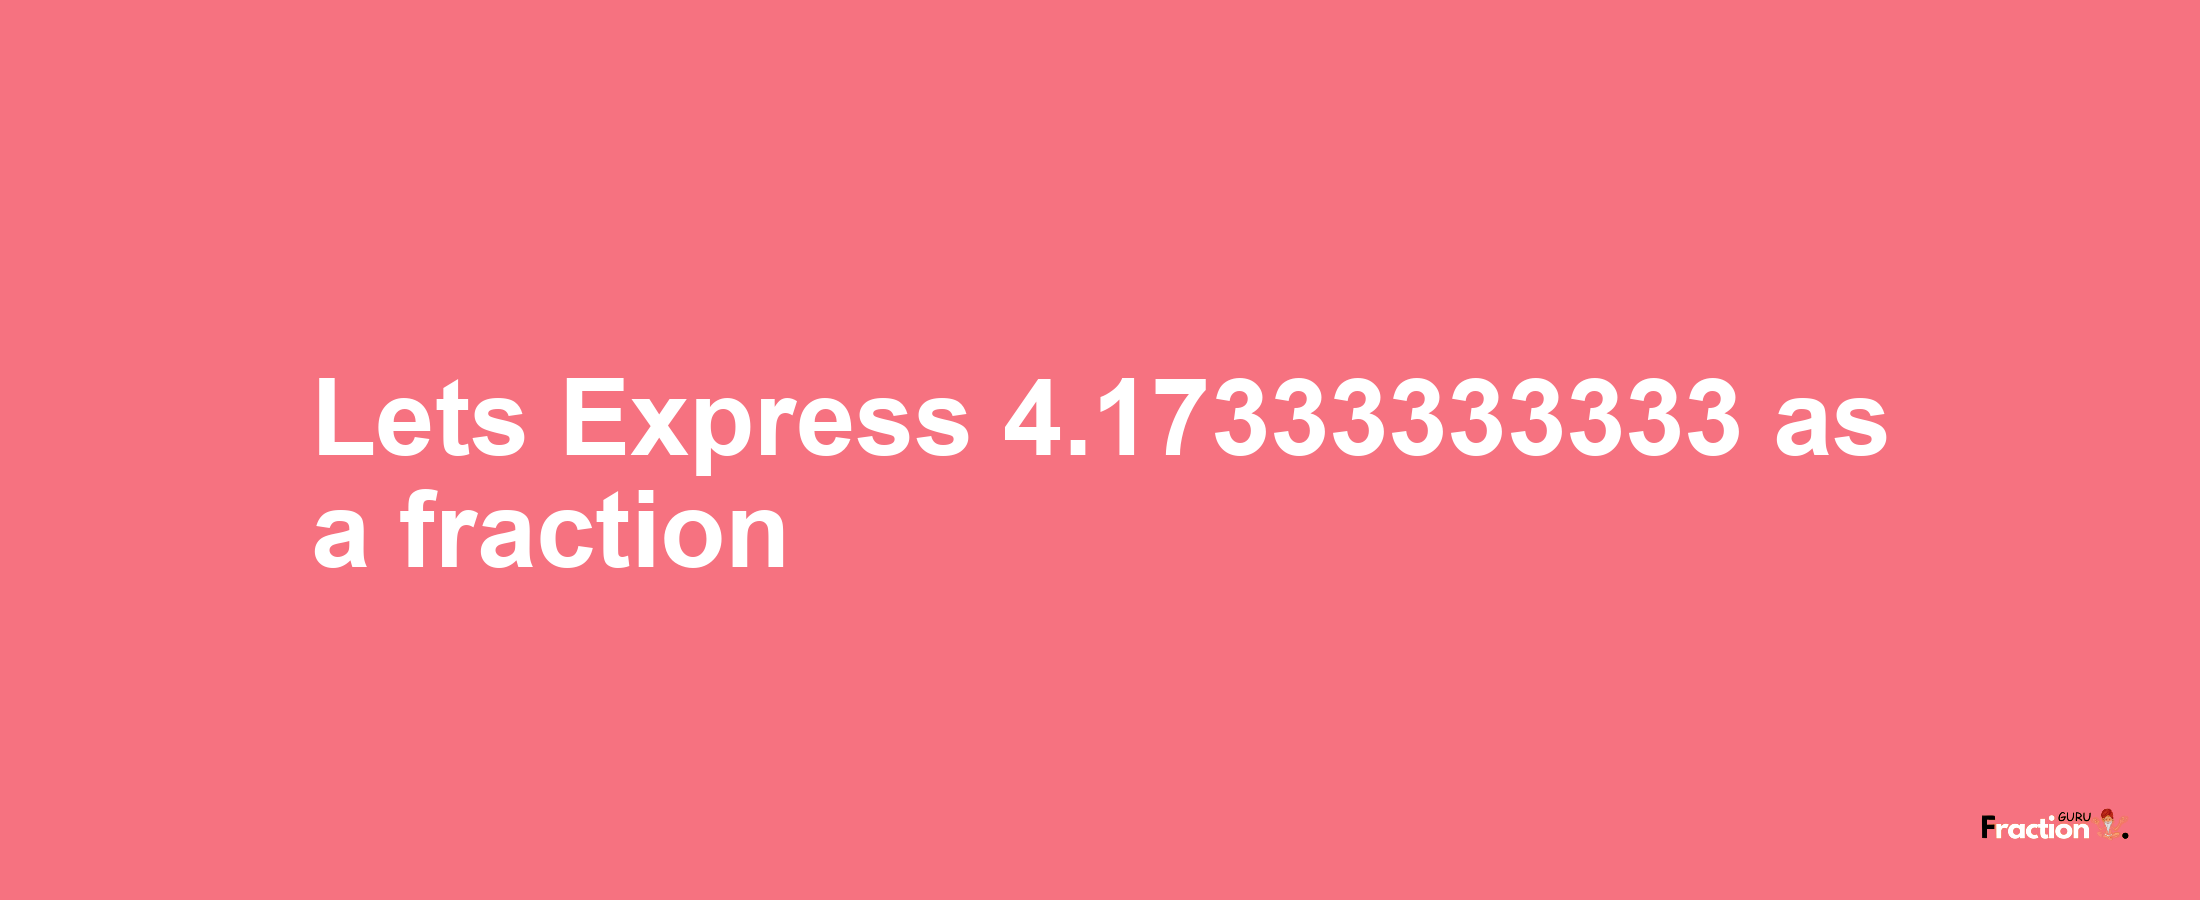 Lets Express 4.17333333333 as afraction